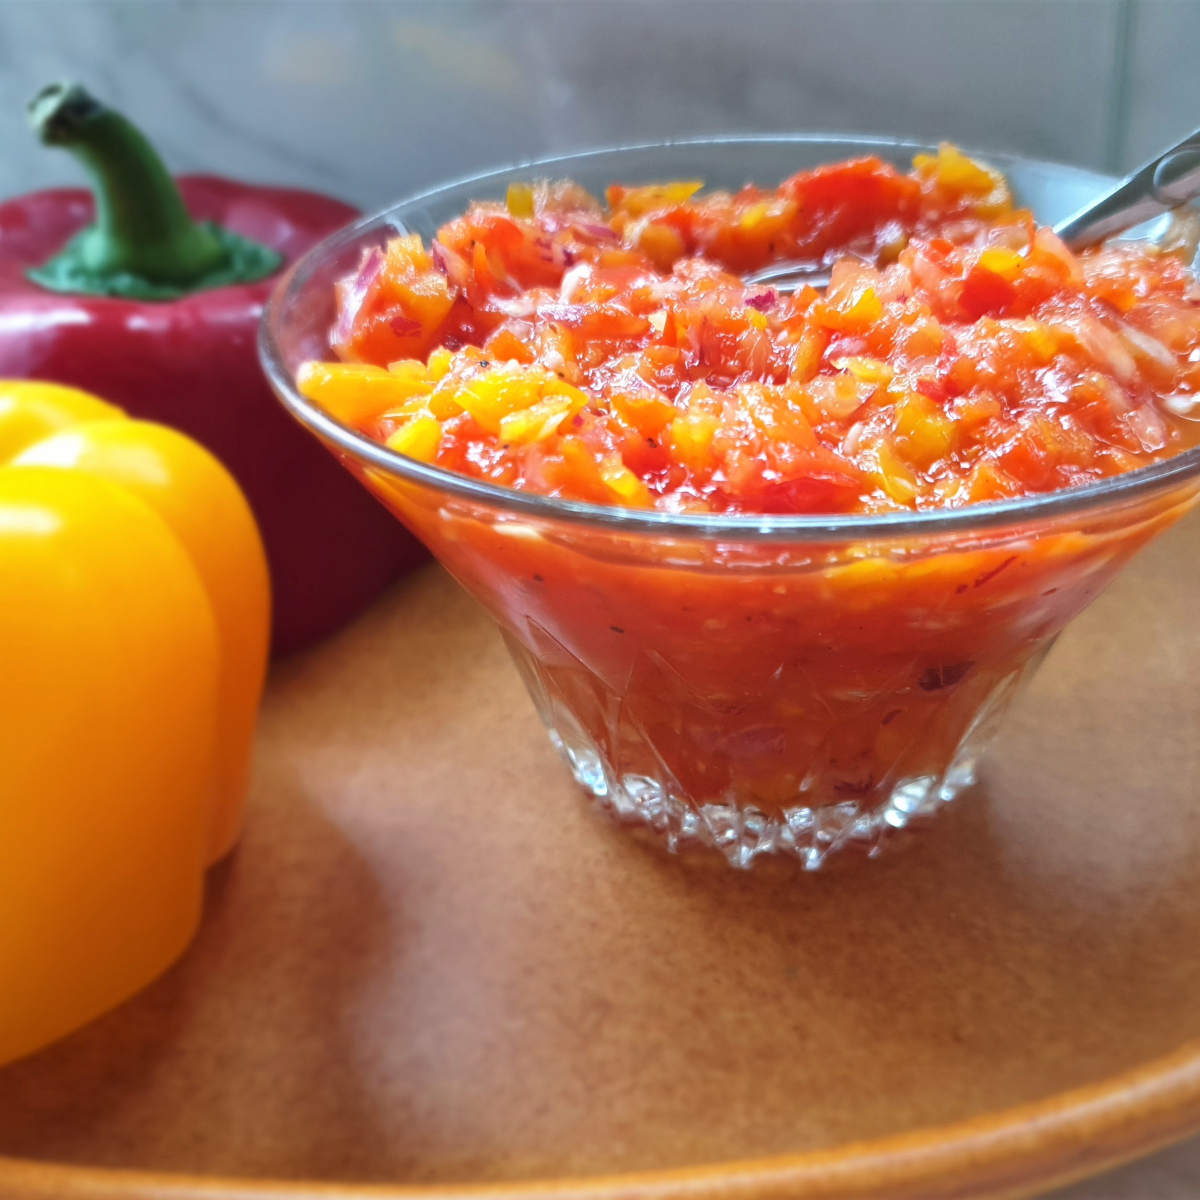 A dish of sweet pepper relish.